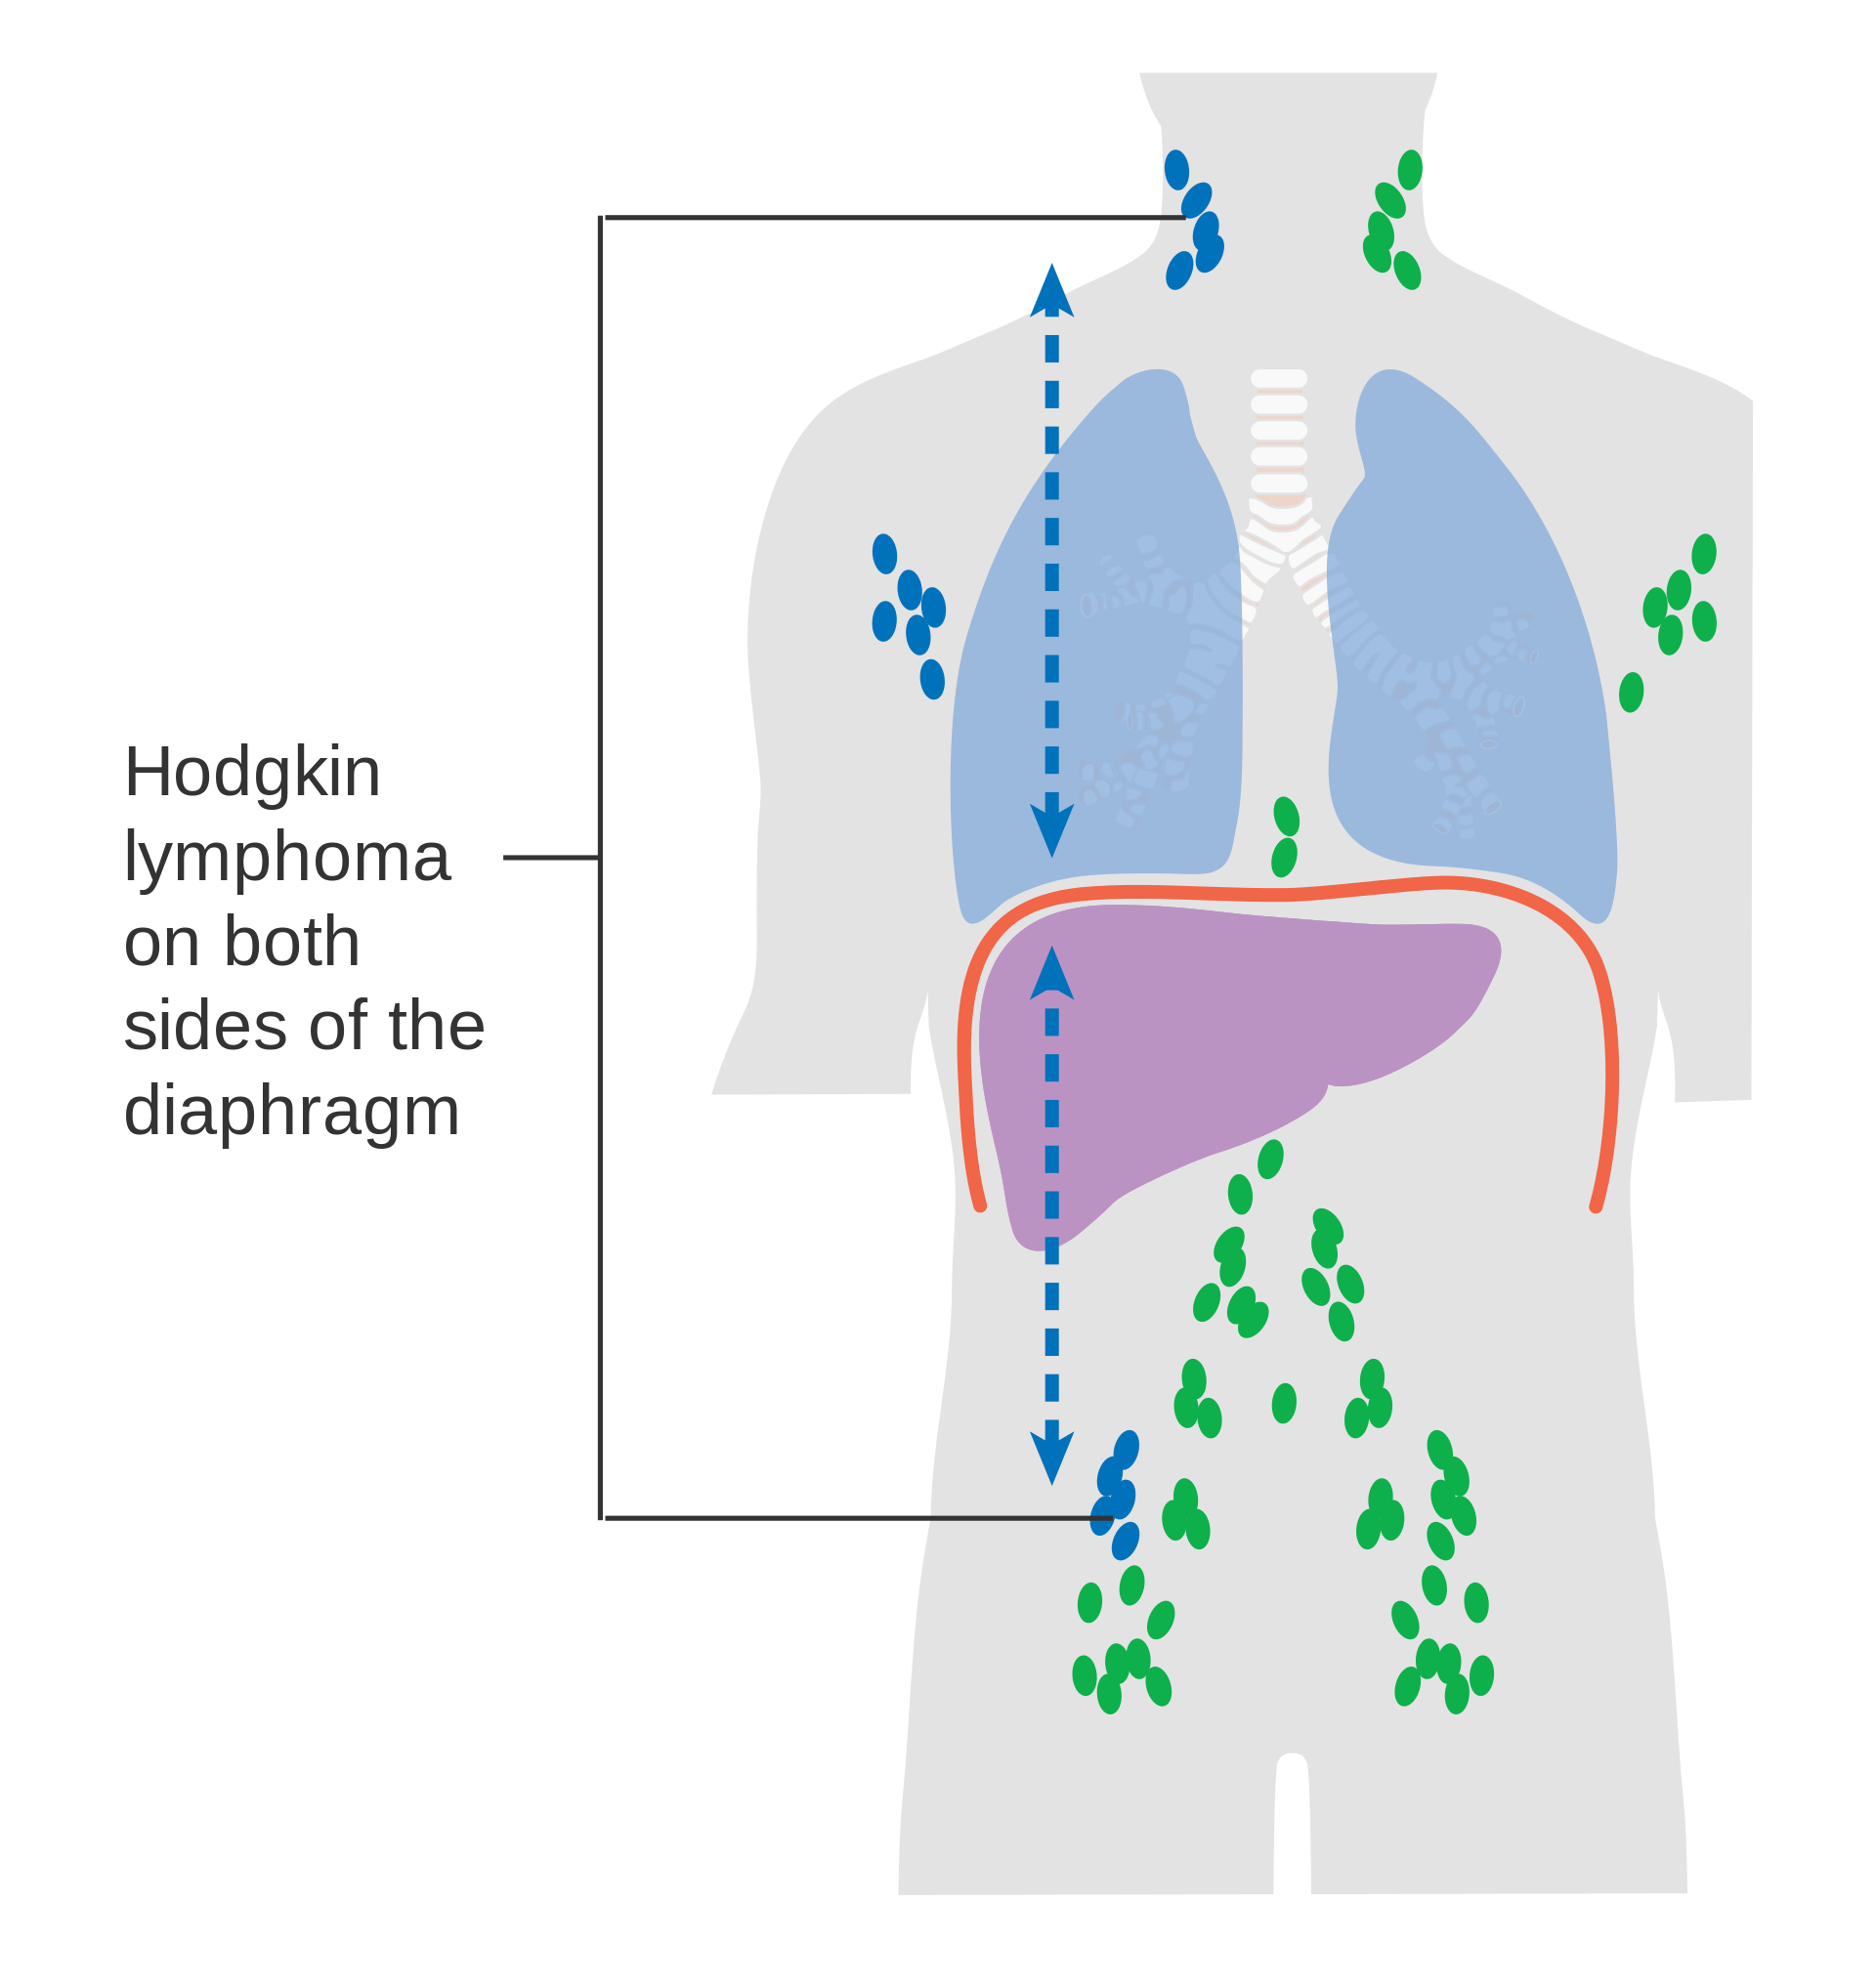 Stage III Hodgkin lymphoma: lymph nodes affected above and below diaphragm